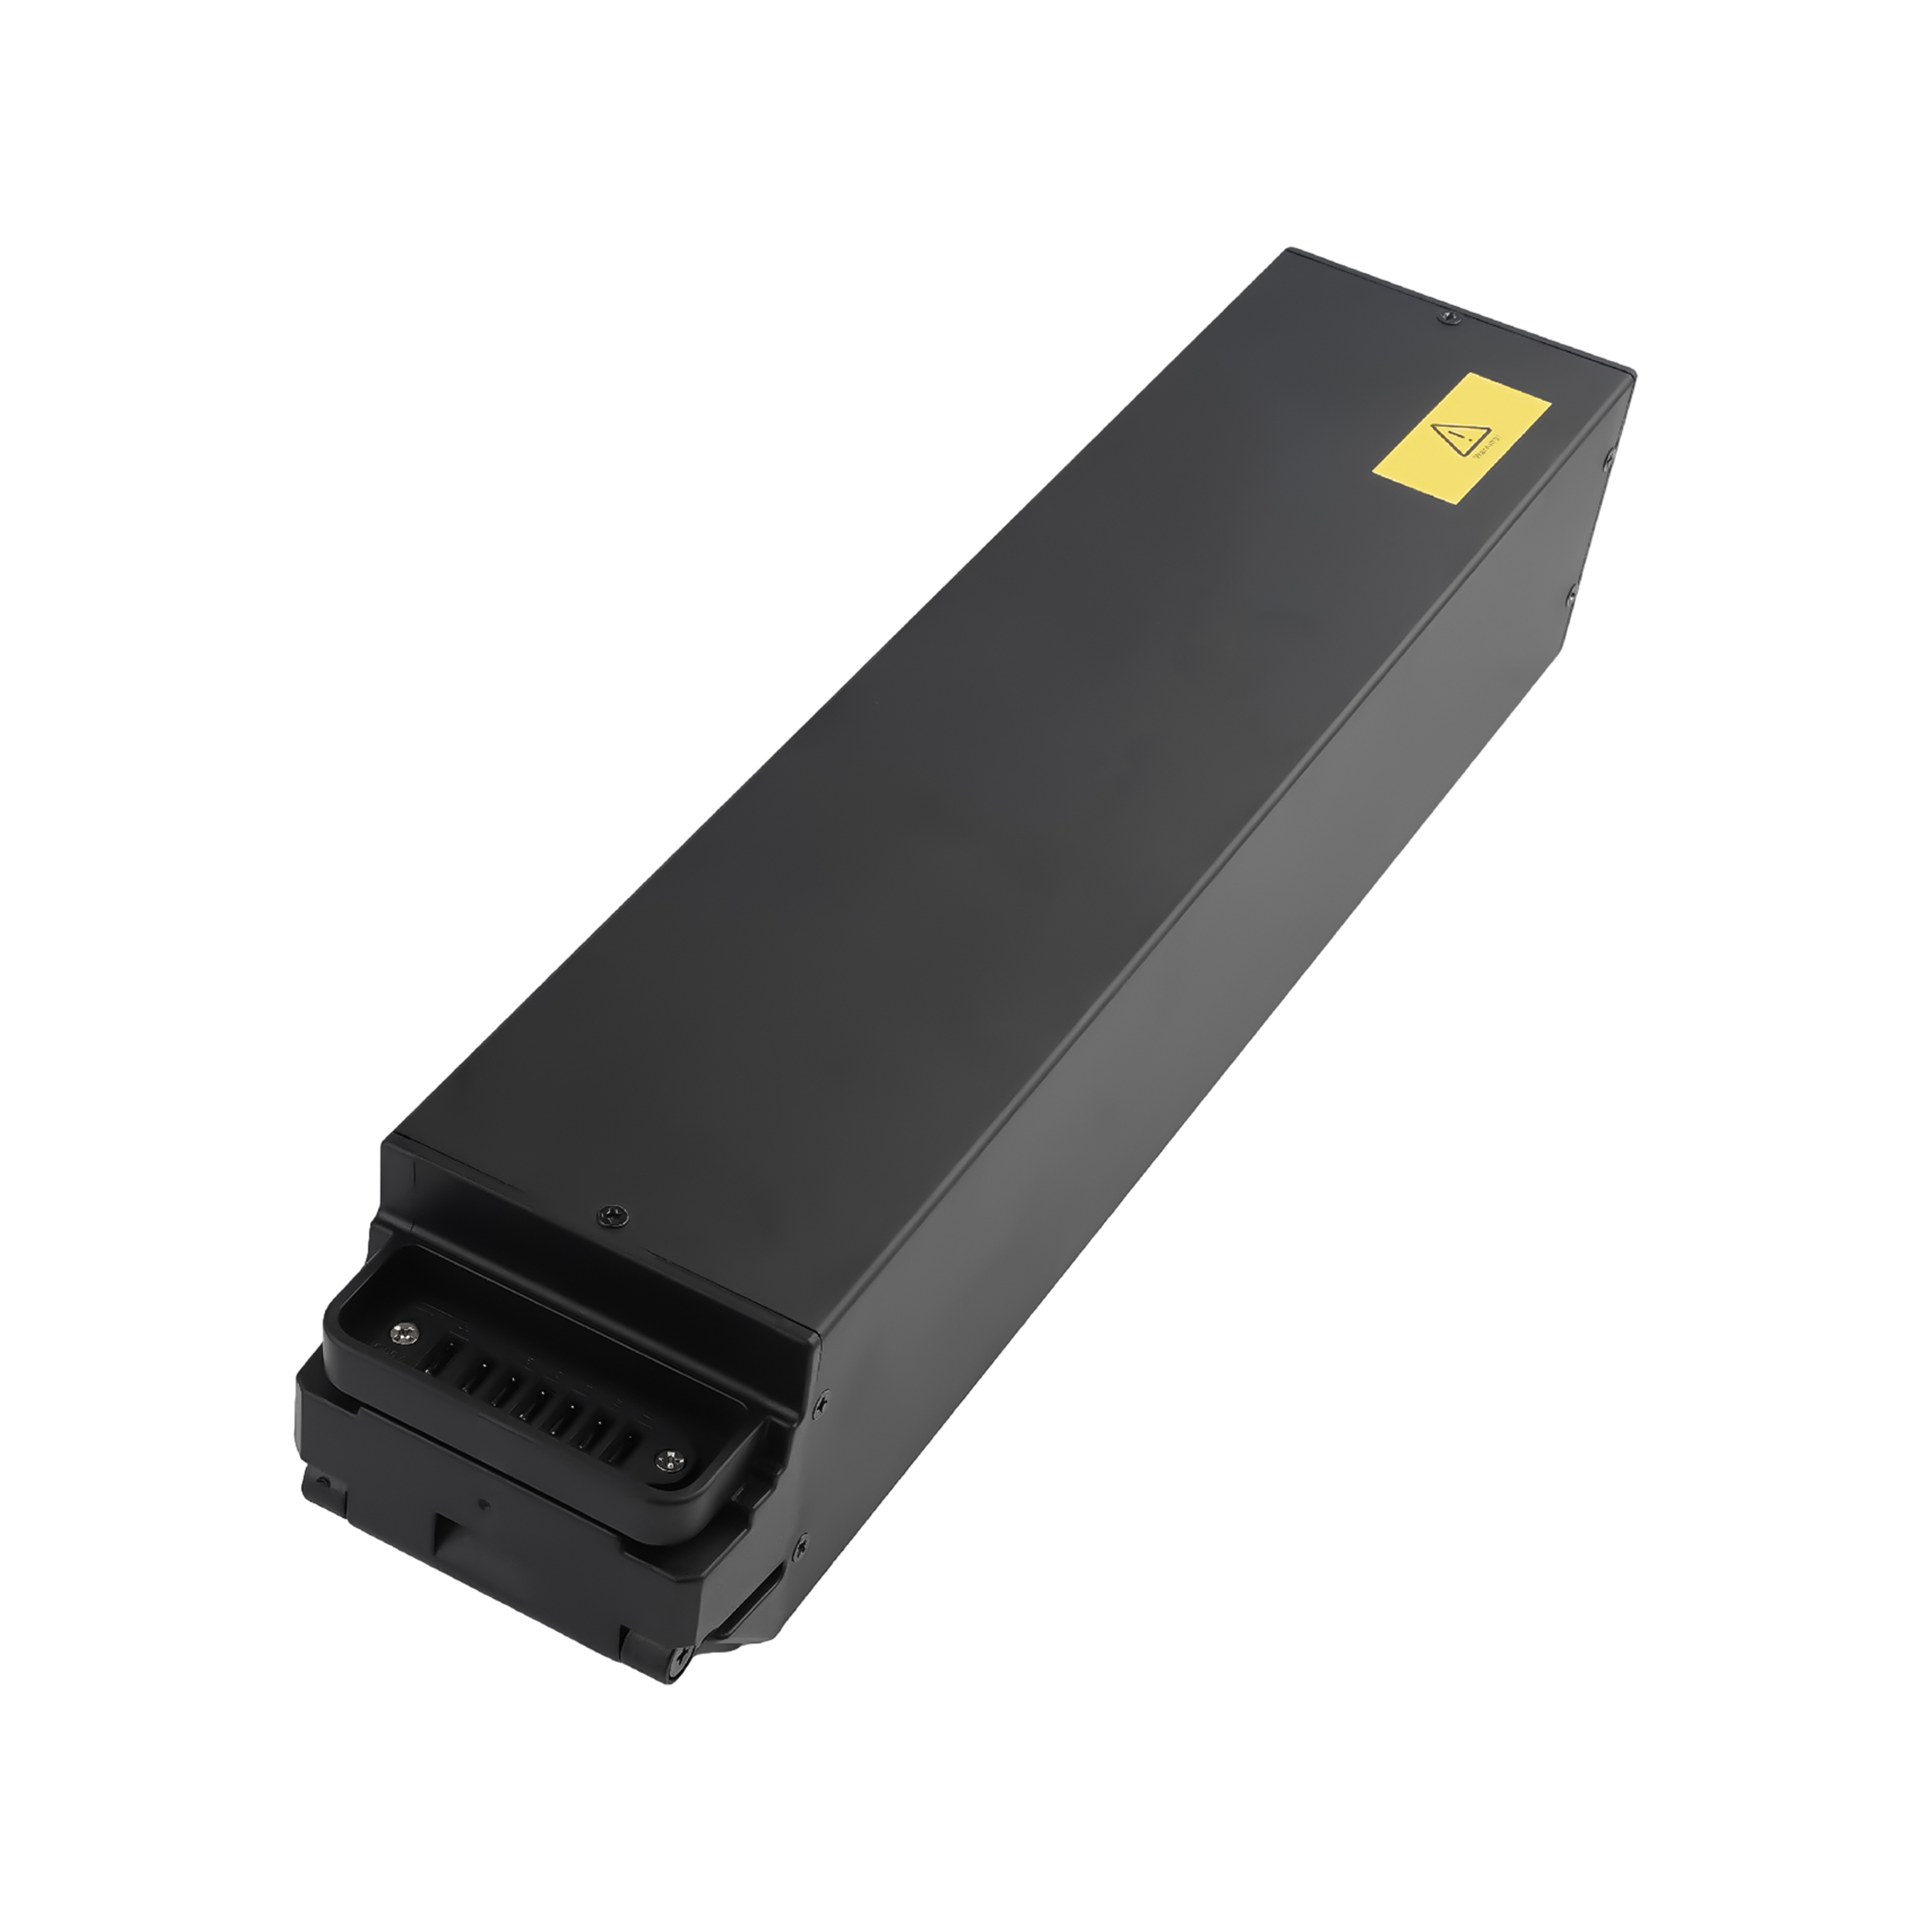 P5 Battery Pack